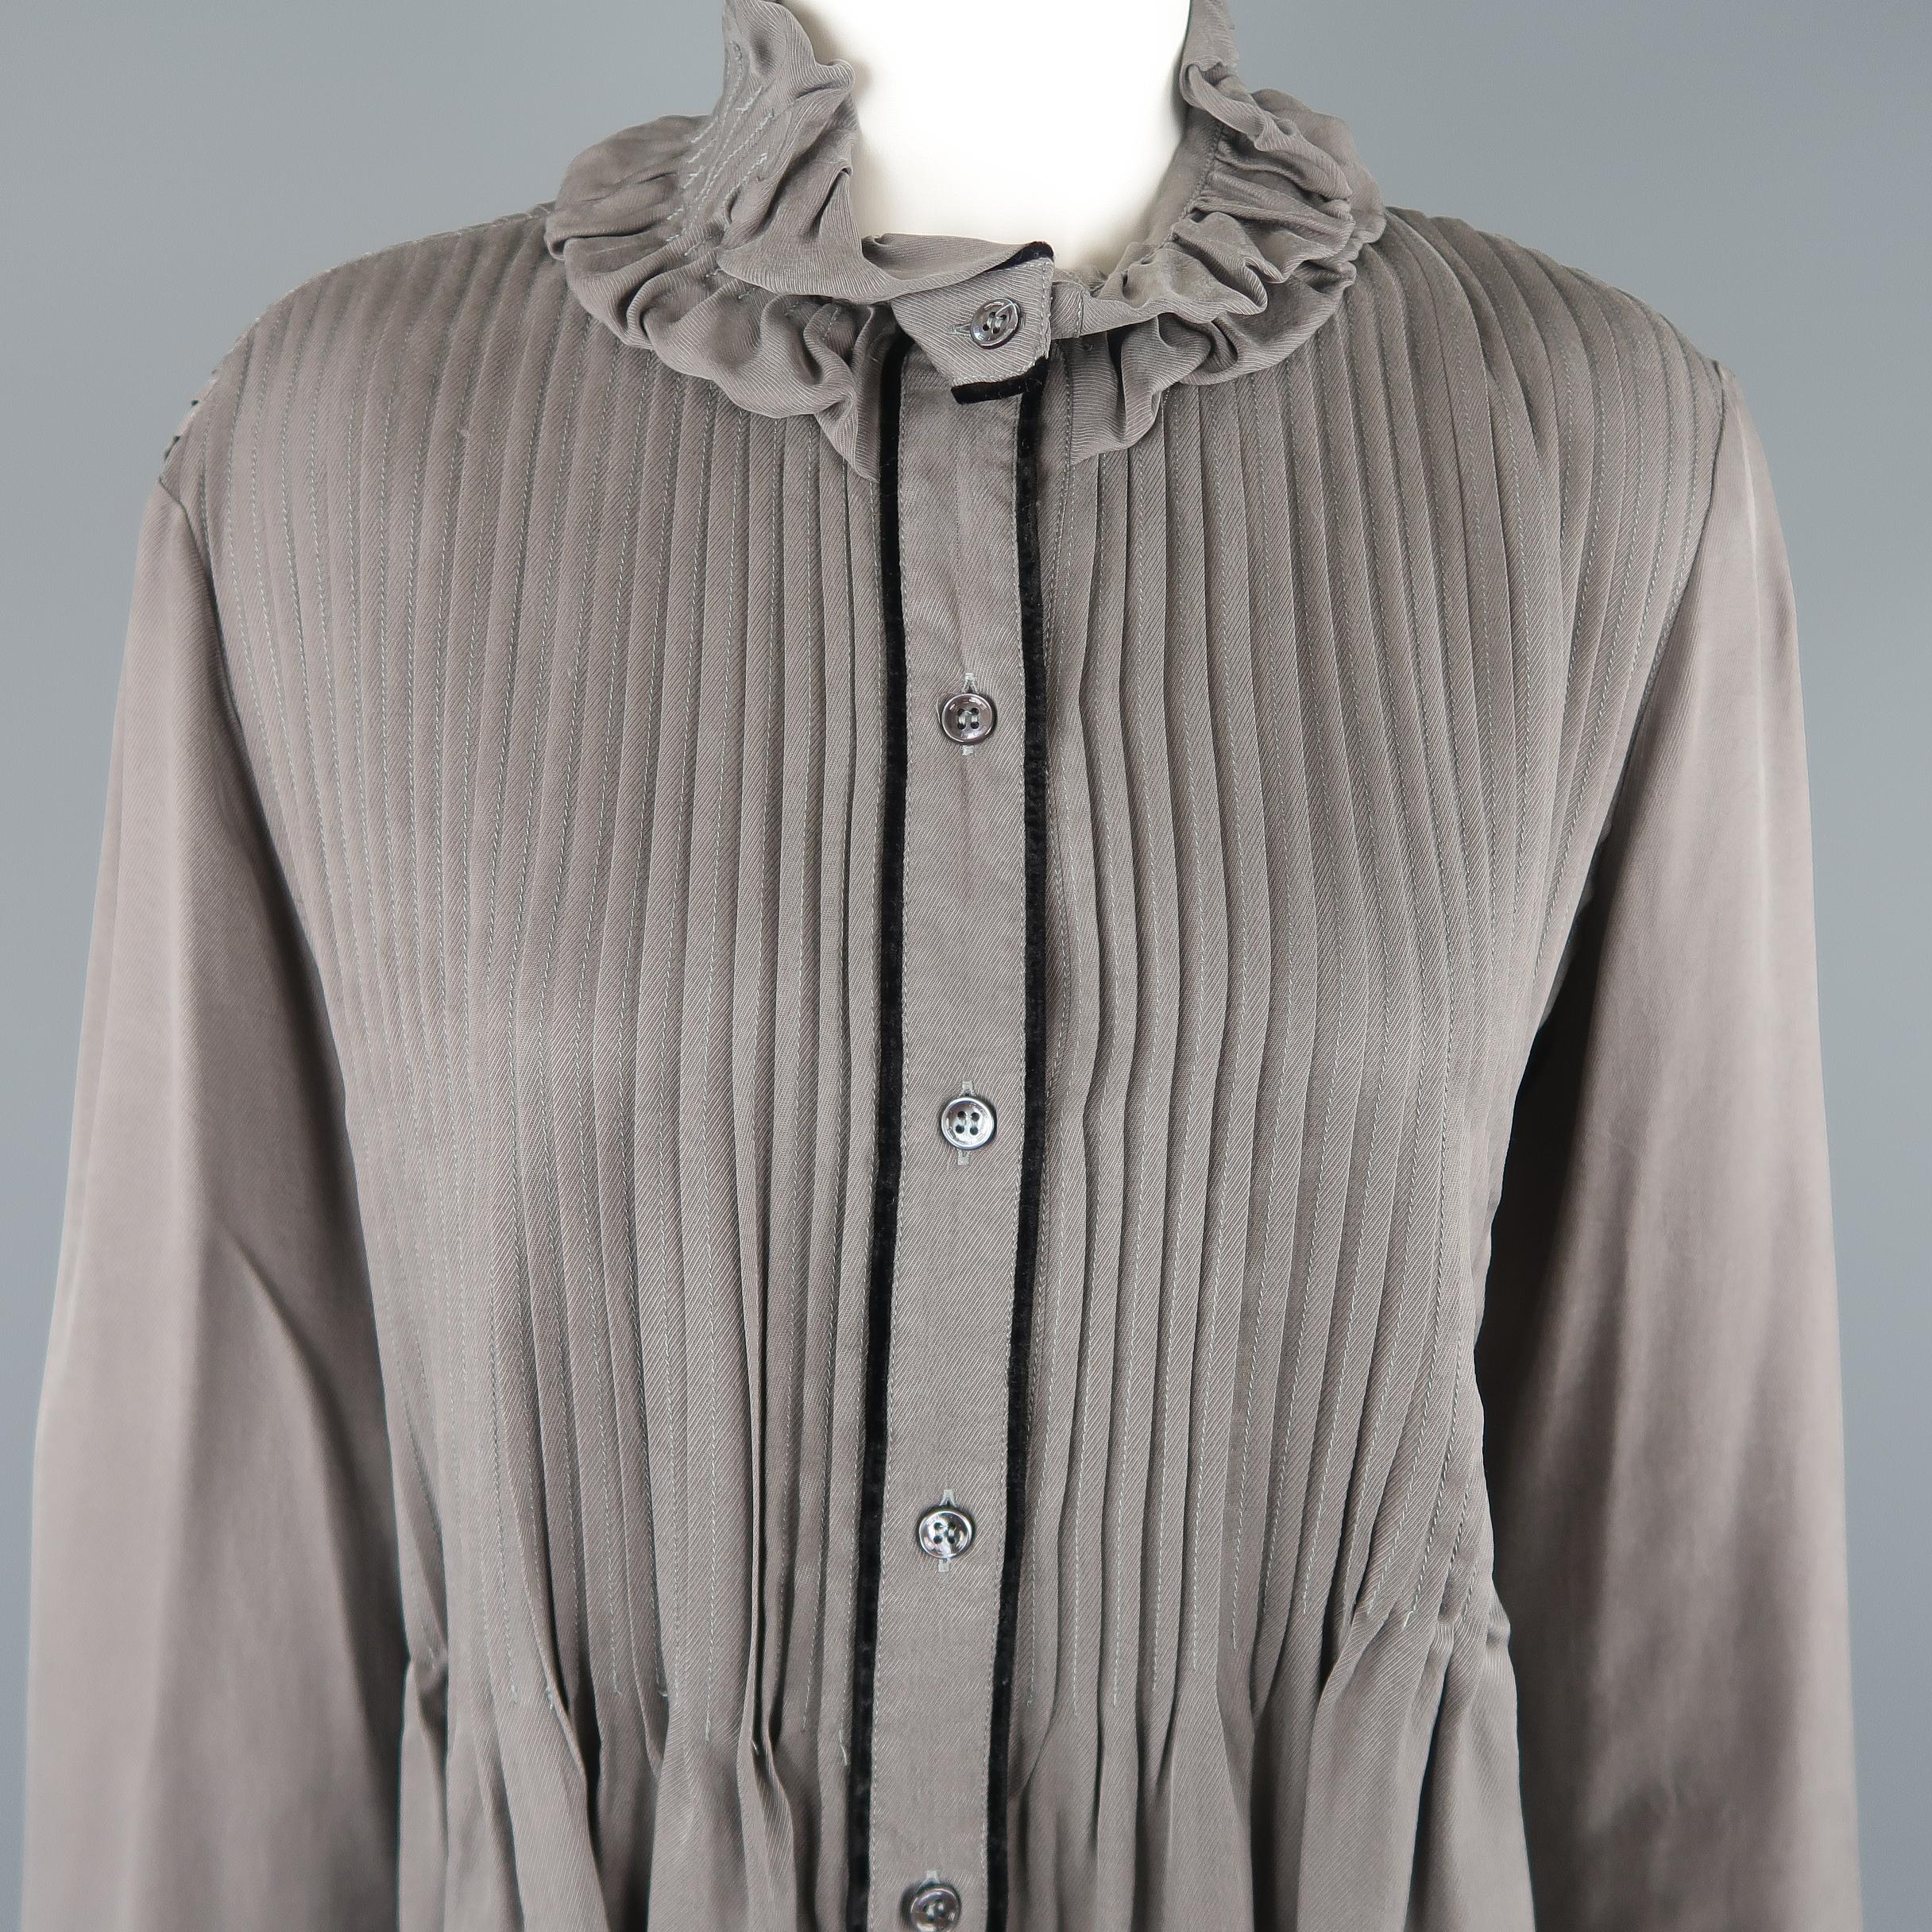 Oversized Etro blouse comes in gray twill with a gathered collar, velvet piping, and half pleated drop waist ruffle silhouette. Care tag removed. As-is. Made in Italy.
 
Good Pre-Owned Condition.
Marked: IT 42
 
Measurements:
 
Shoulder: 16